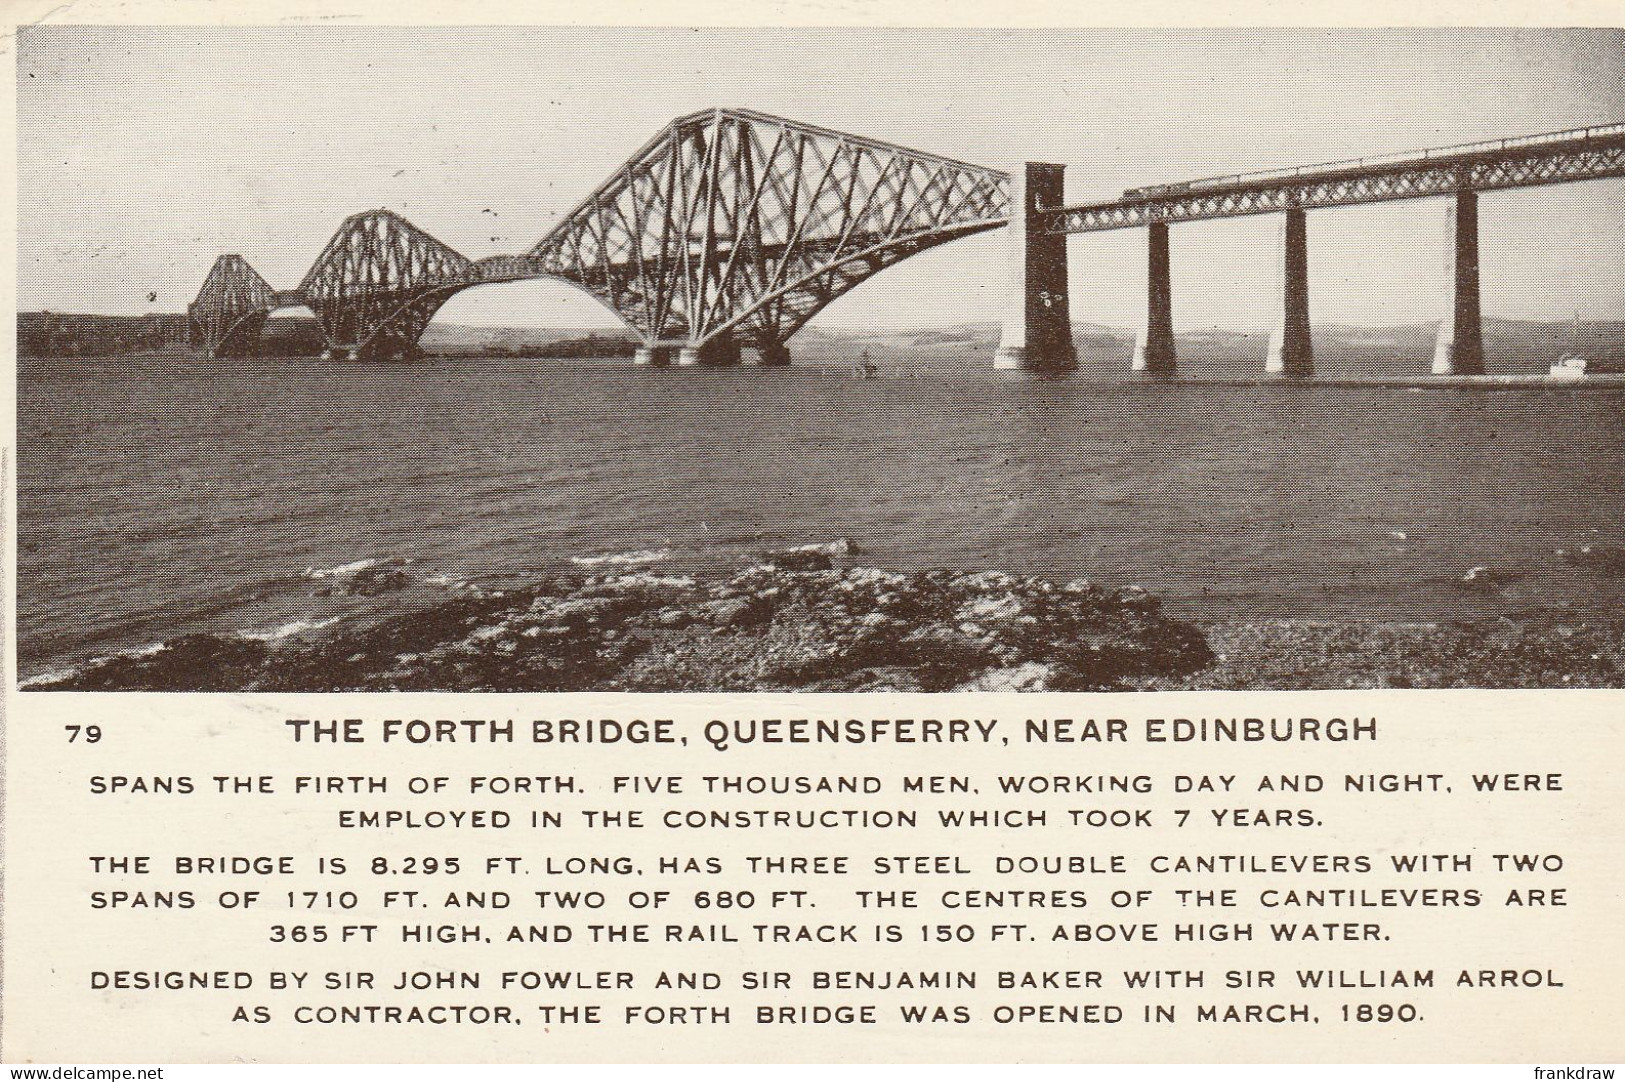 Postcard - The Fourth Bridge, Queensferry, Near Edinburgh - Card No.79 - Posted But Date Is Unreadable  - Very Good - Unclassified